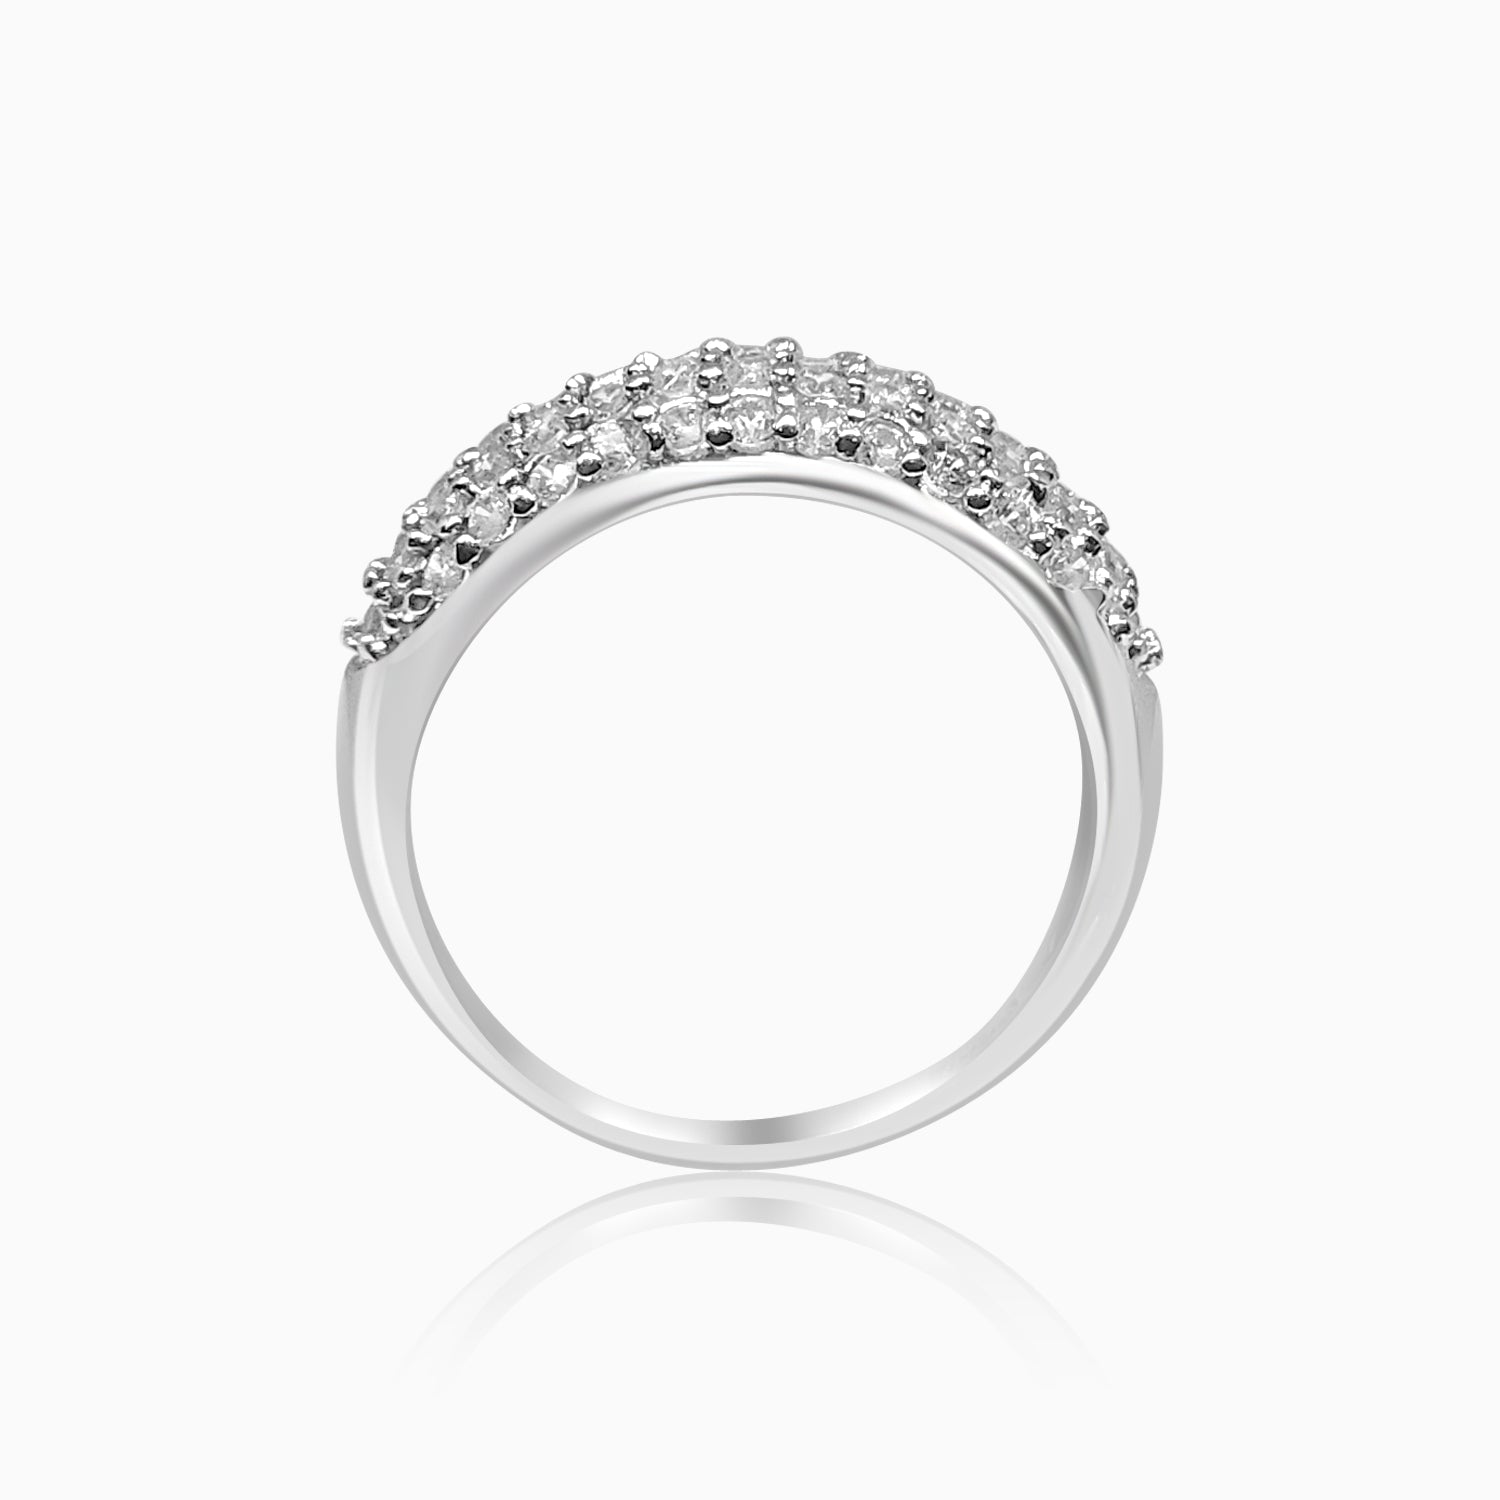 Silver Sparkling Band Ring 6.5mm